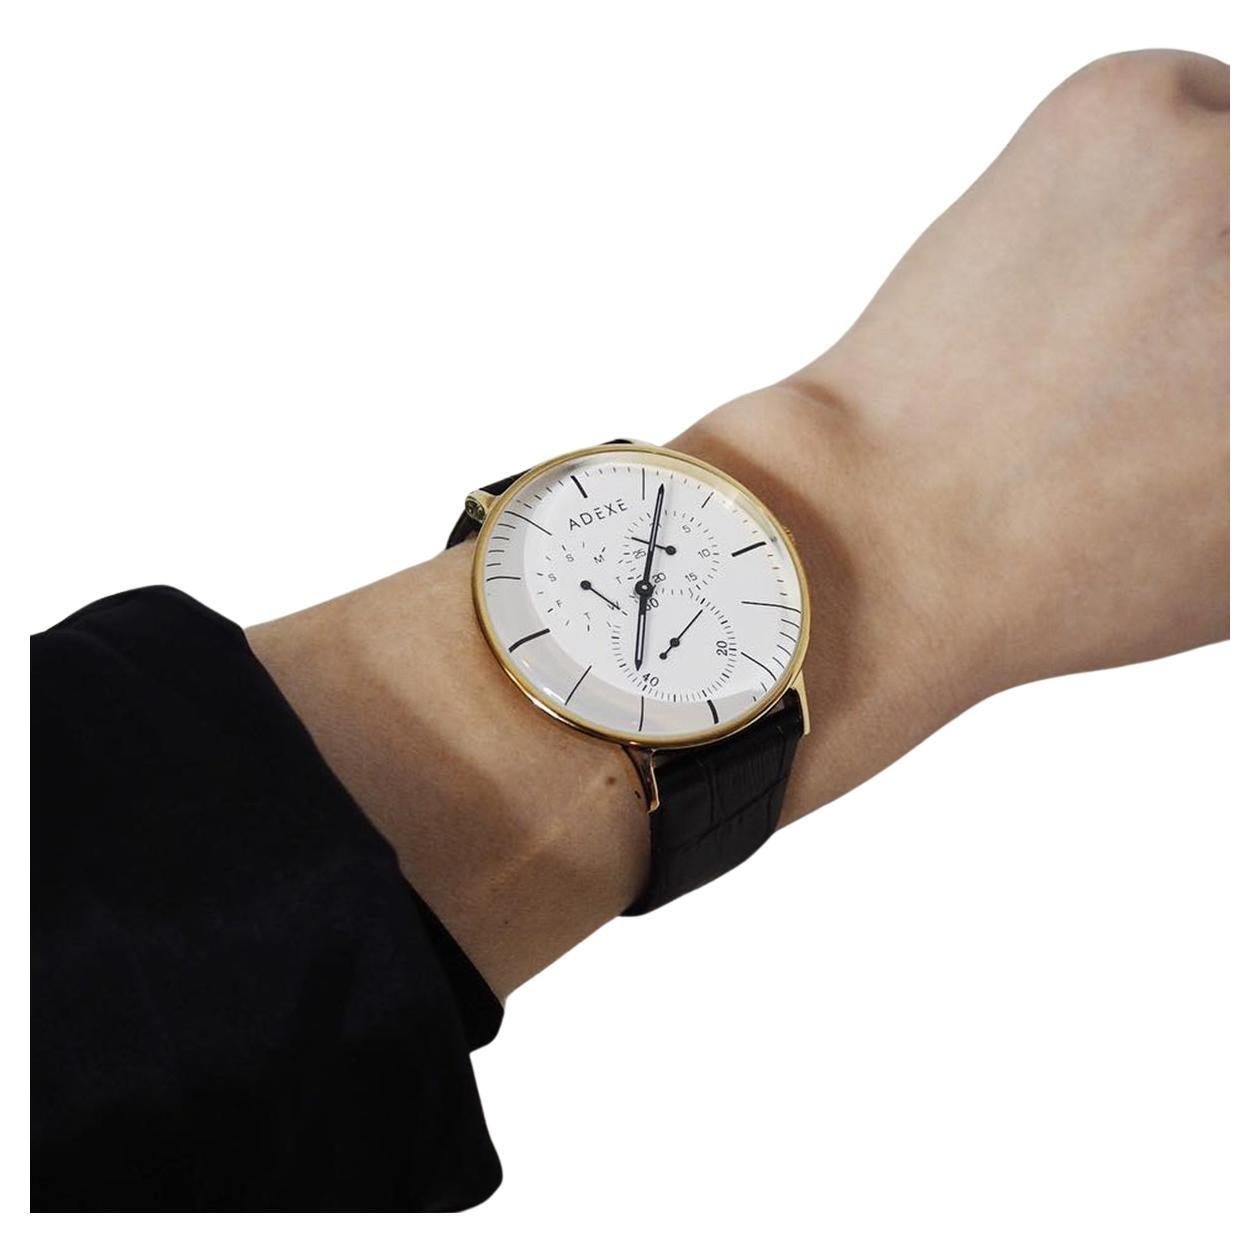 THEY - 41mm vintage white and gold quartz watch unisex